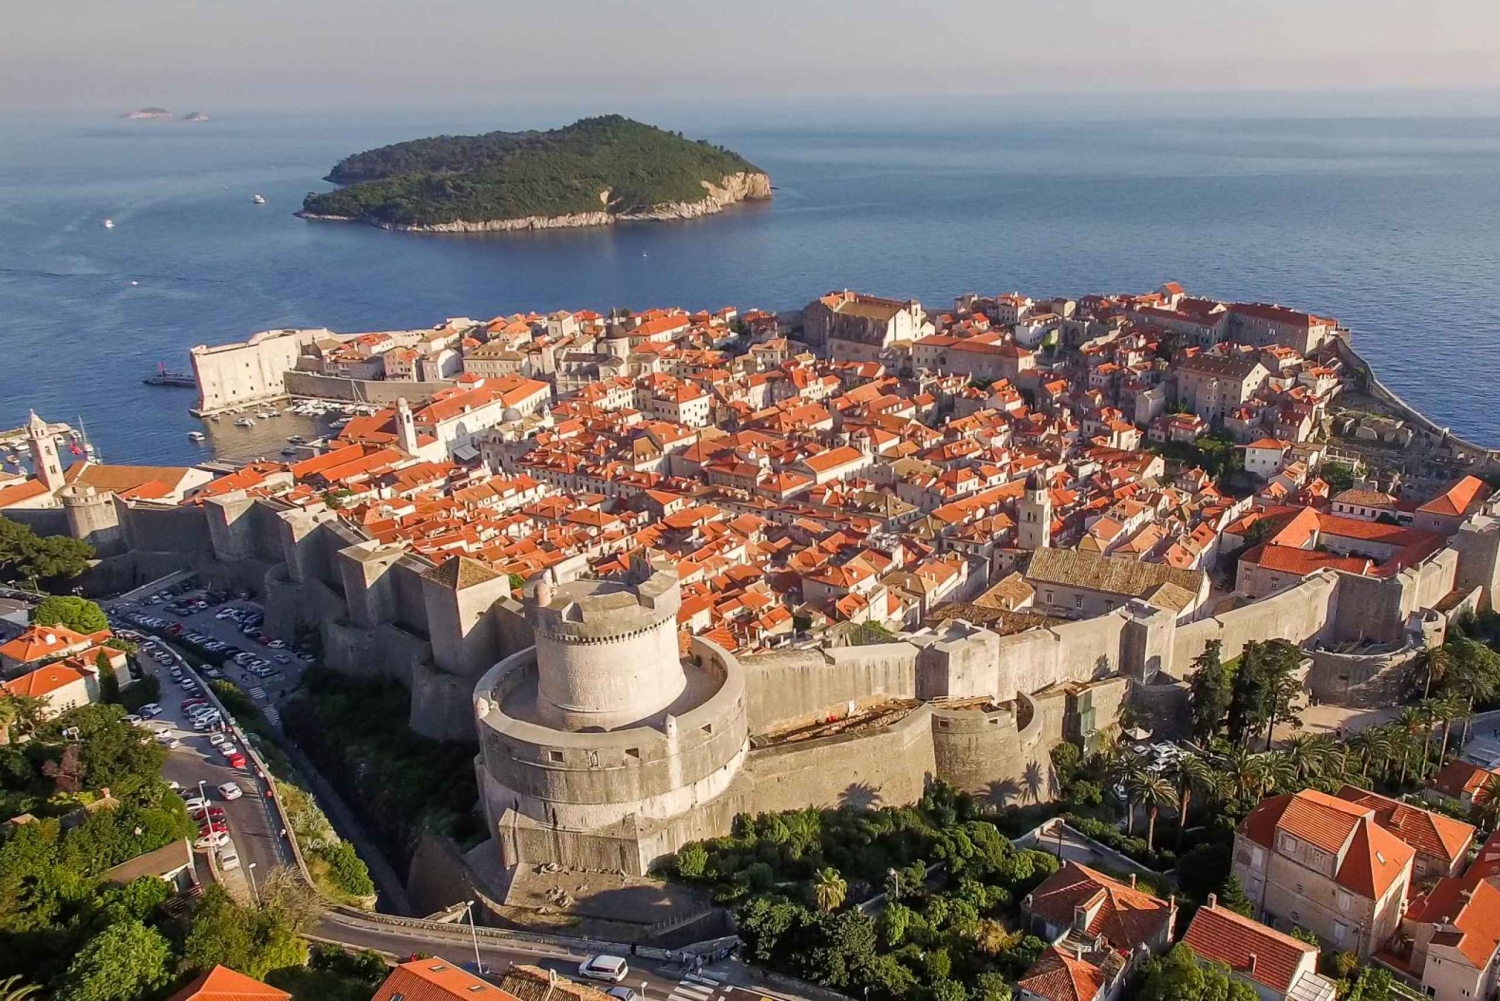 Dubrovnik History and Game of Thrones Locations Tour